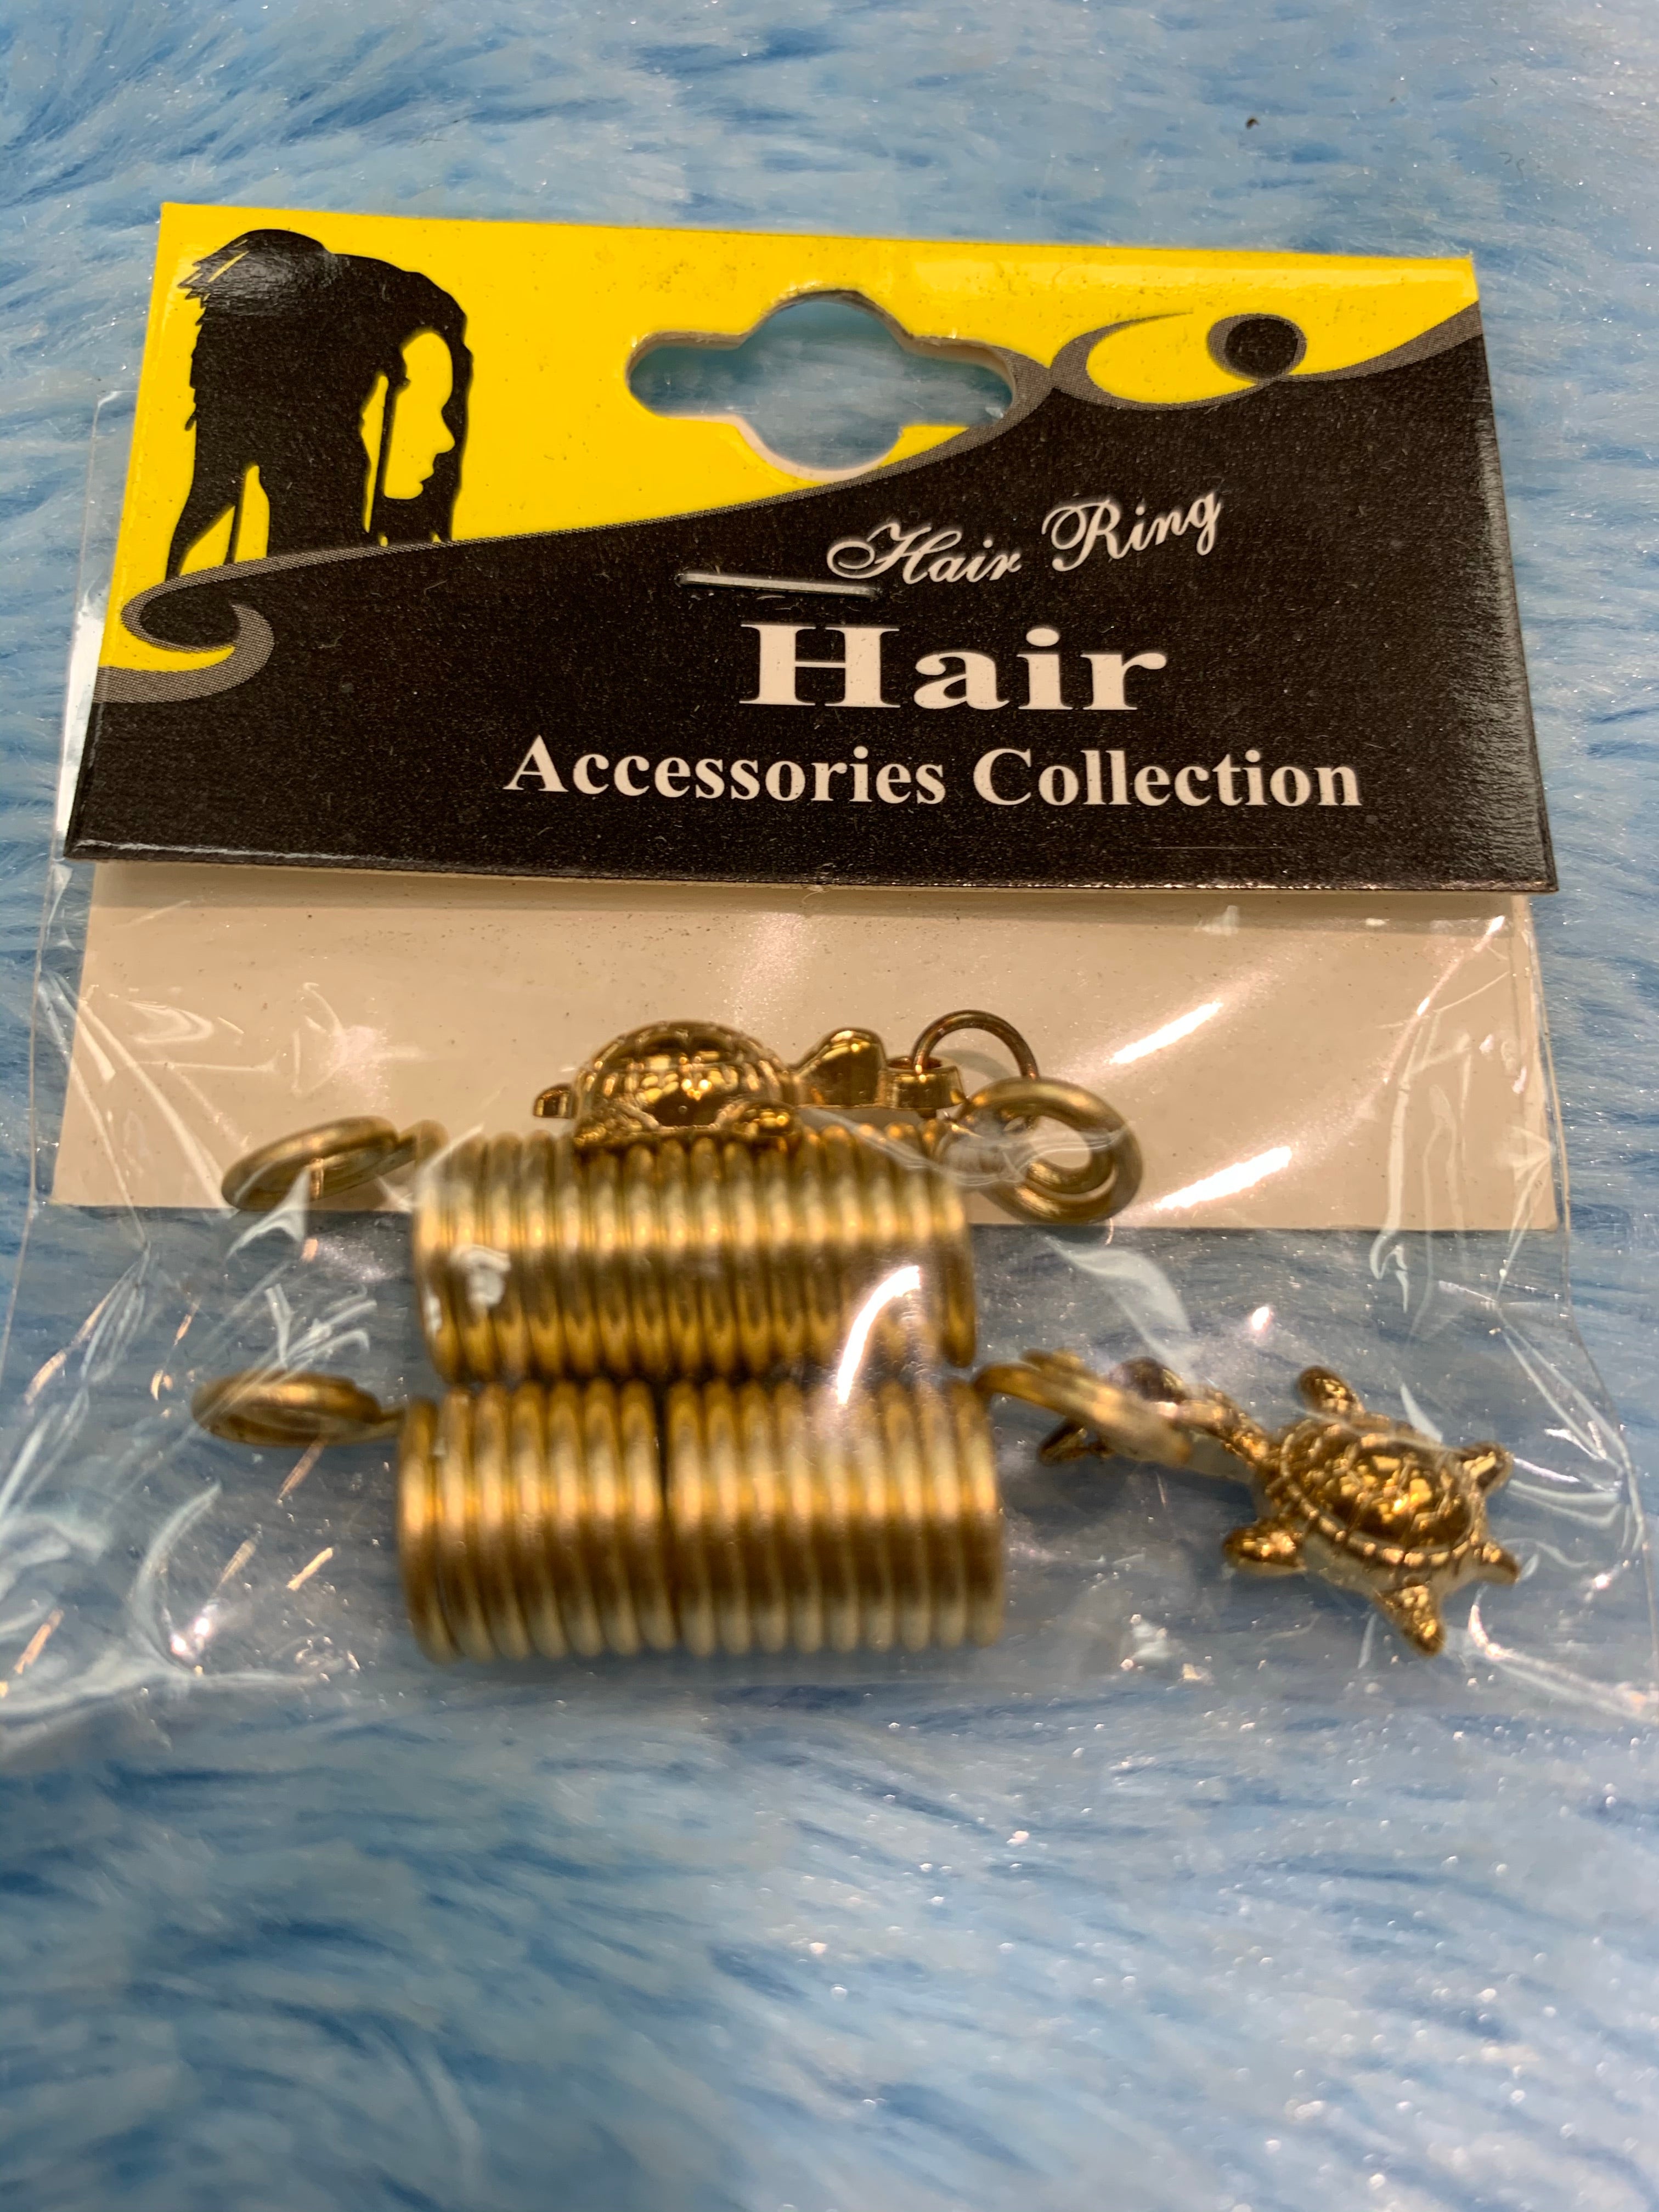 Hair accessories gold beads